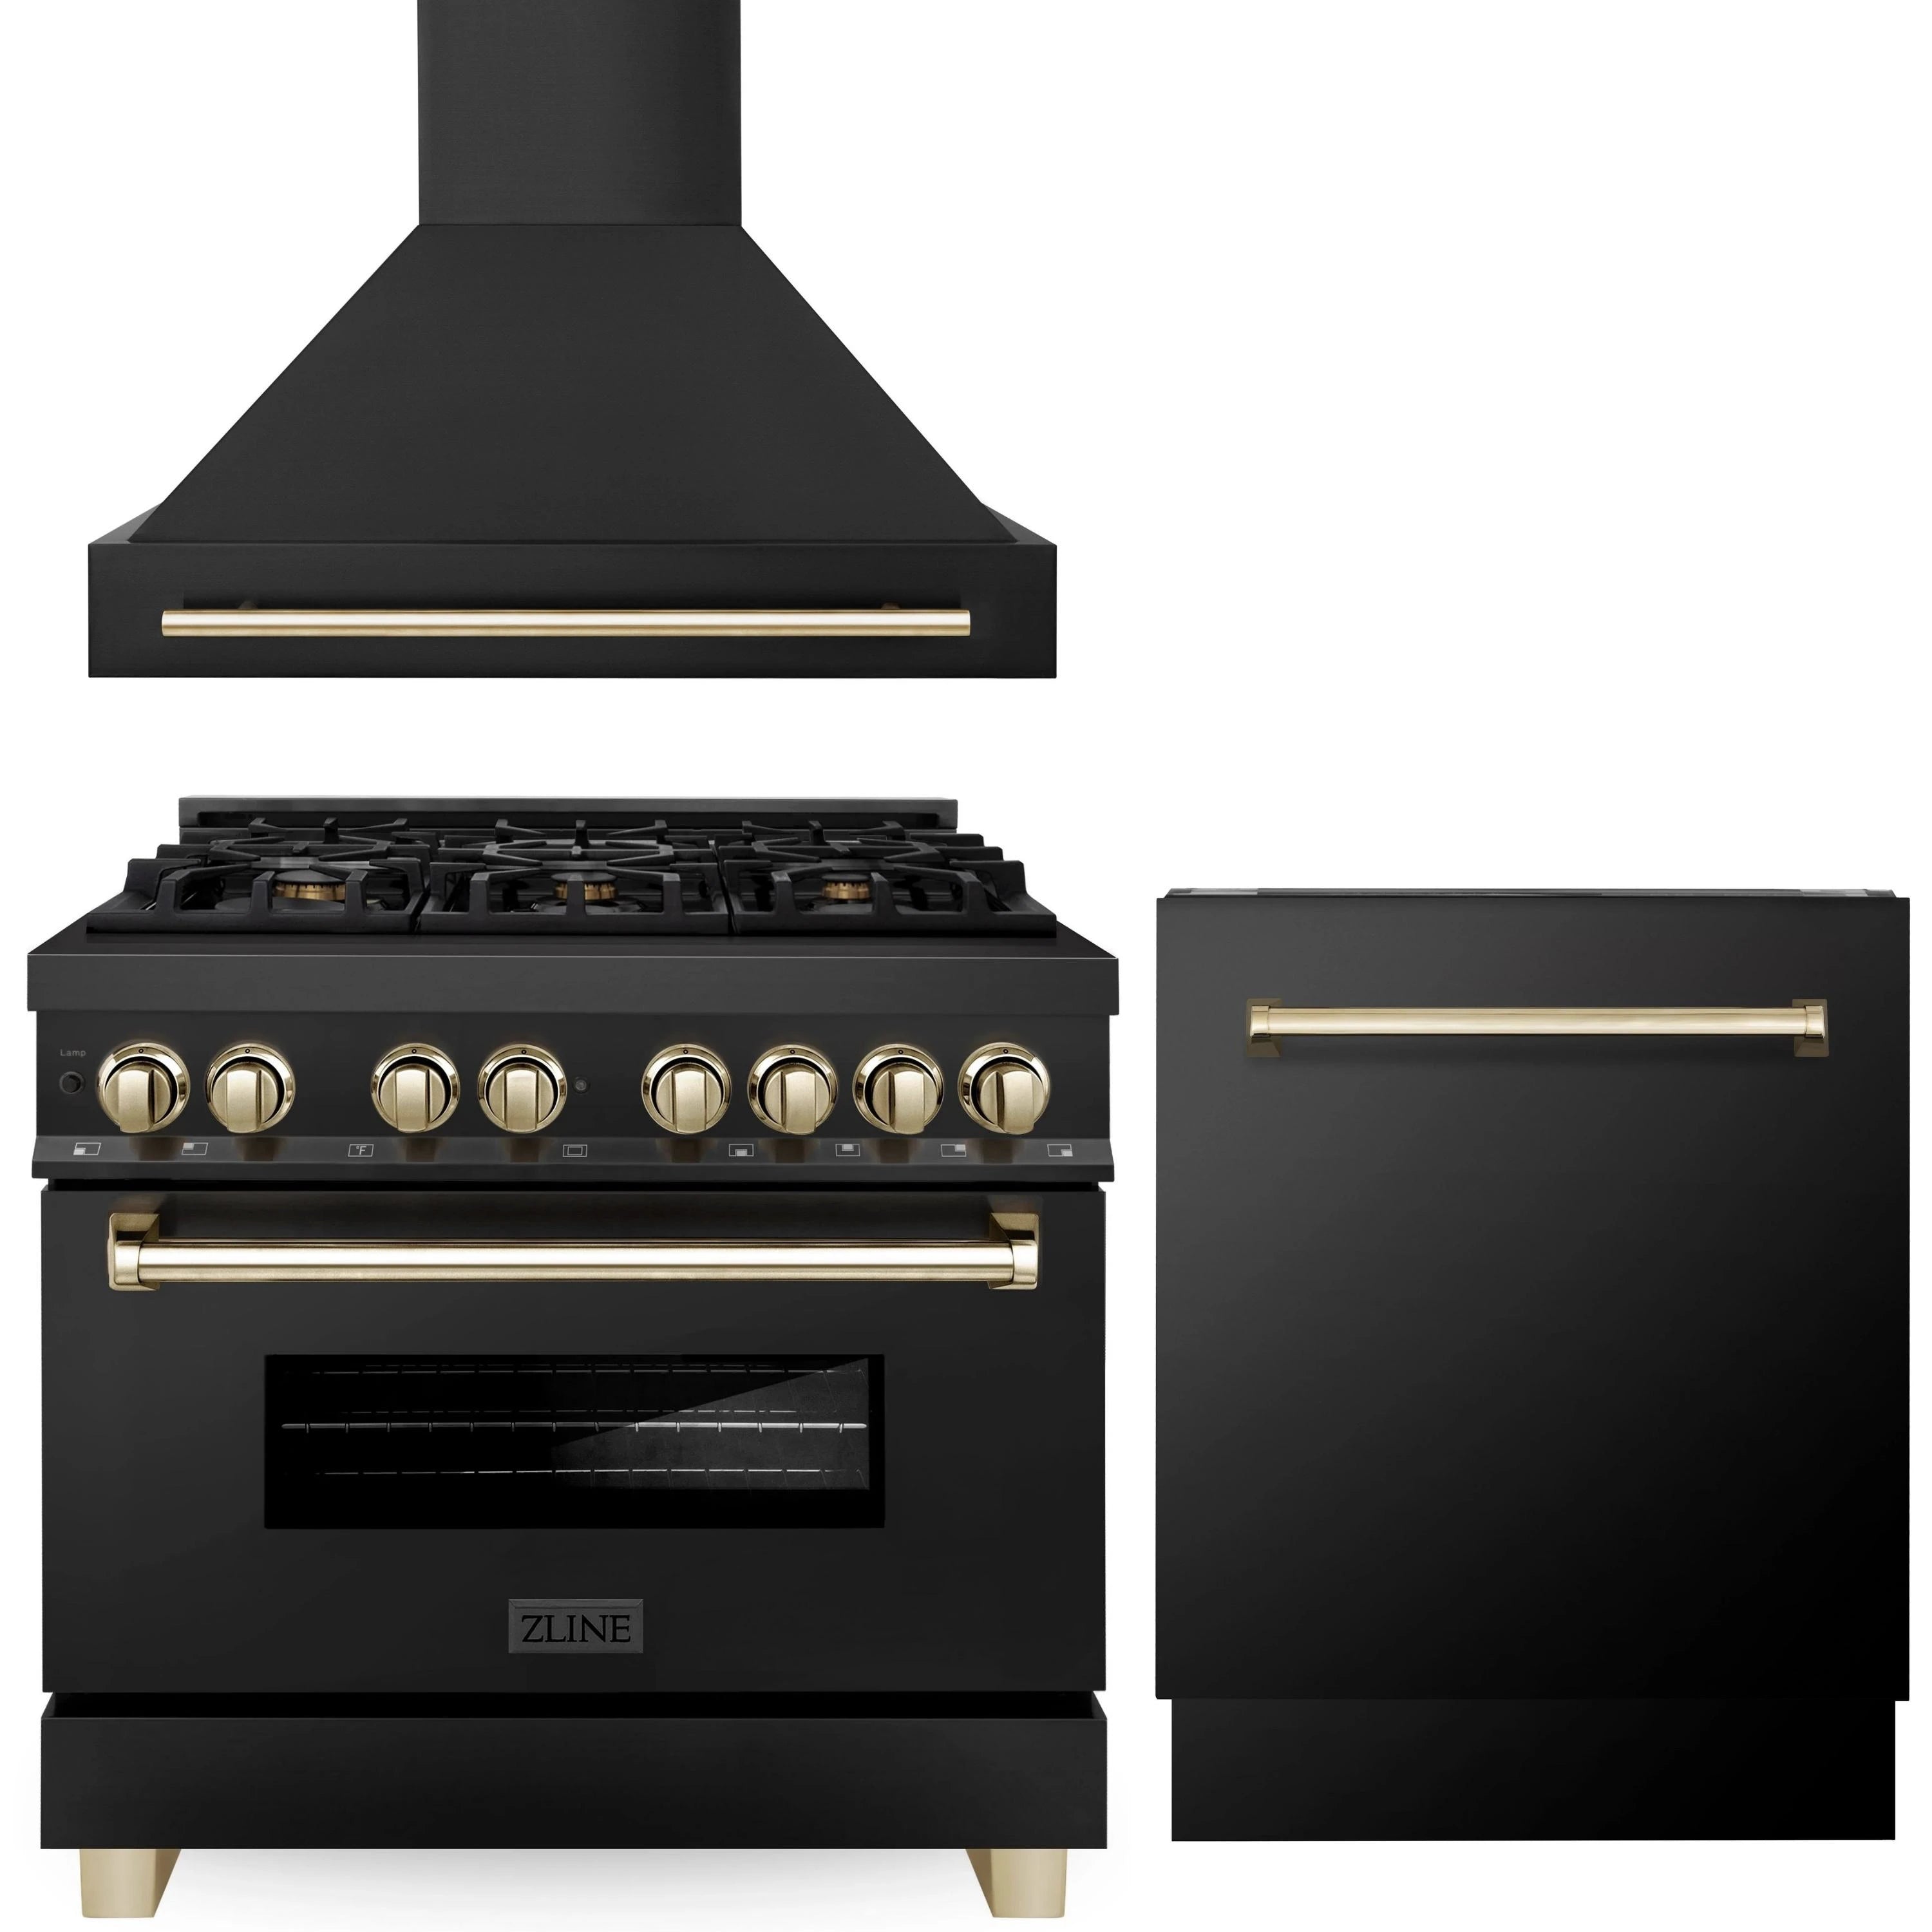 ZLINE Autograph Edition 3-Piece Appliance Package - 36-Inch Dual Fuel Range, Wall Mounted Range Hood, & 24-Inch Tall Tub Dishwasher in Black Stainless Steel with Gold Trim (3AKP-RABRHDWV36-G)